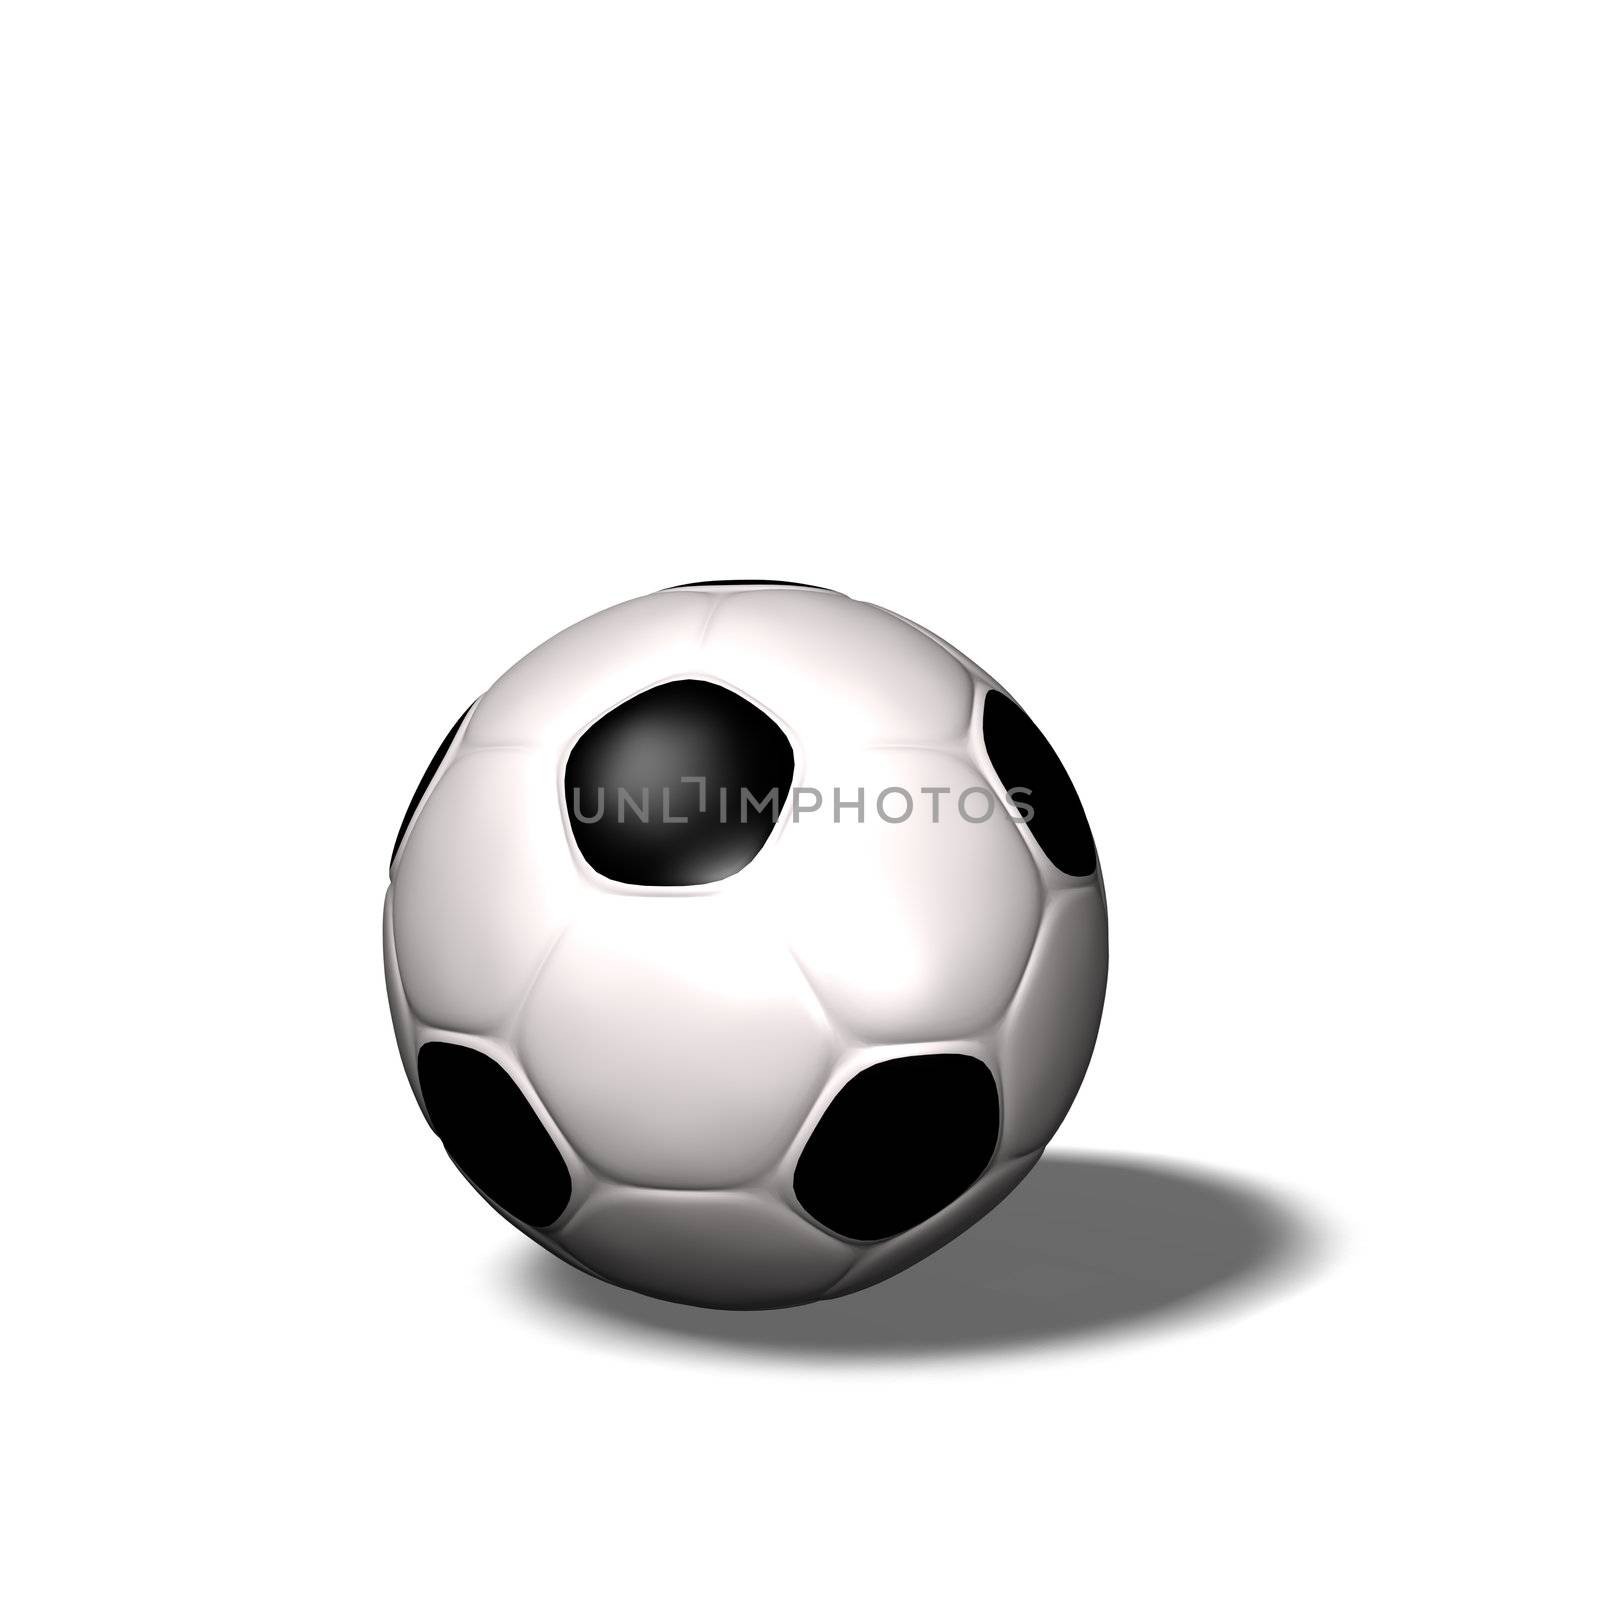 Soccer Ball by nmarques74